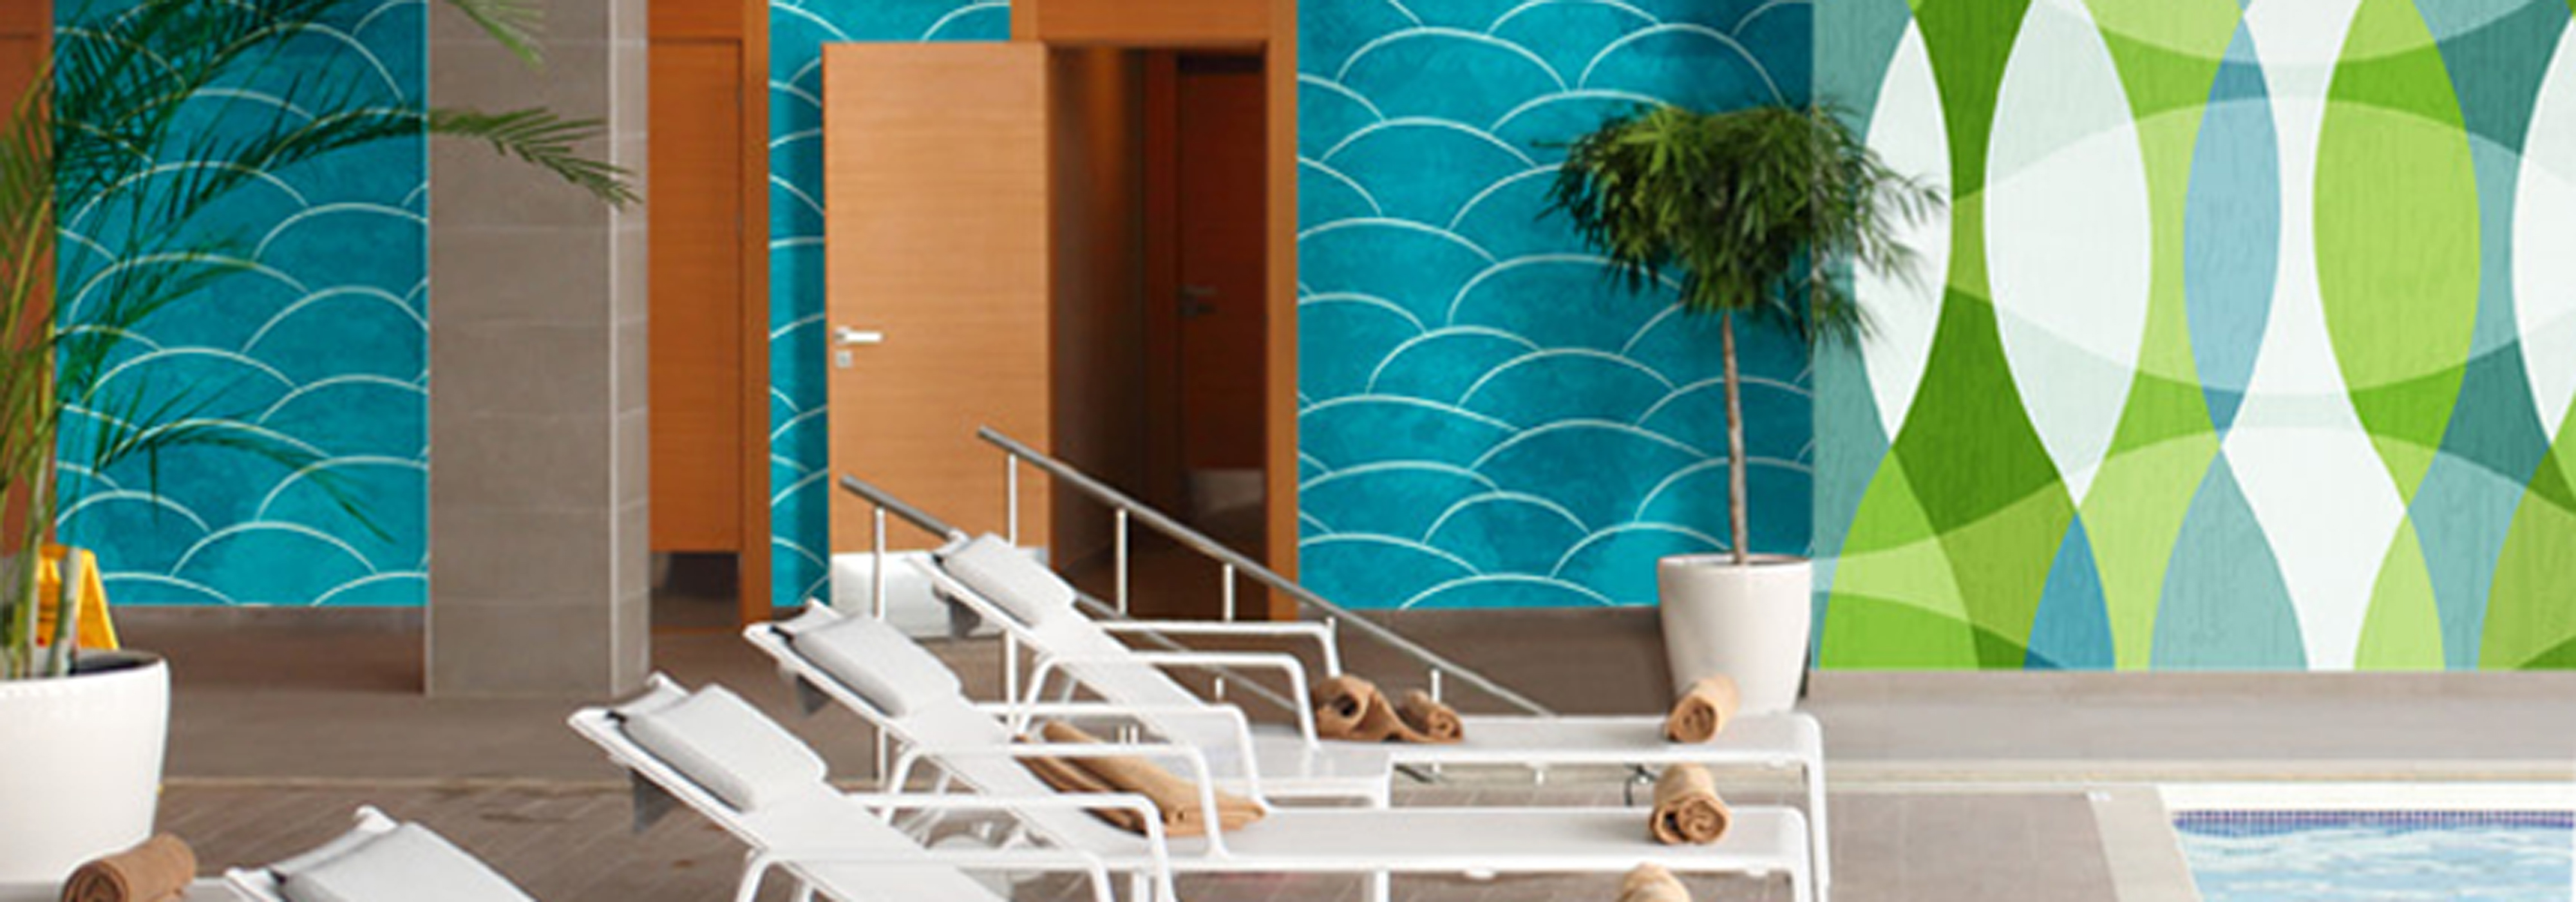 Wall to wall Amplify wallcovering in a hotel pool with bright colorful nautical themed graphics.